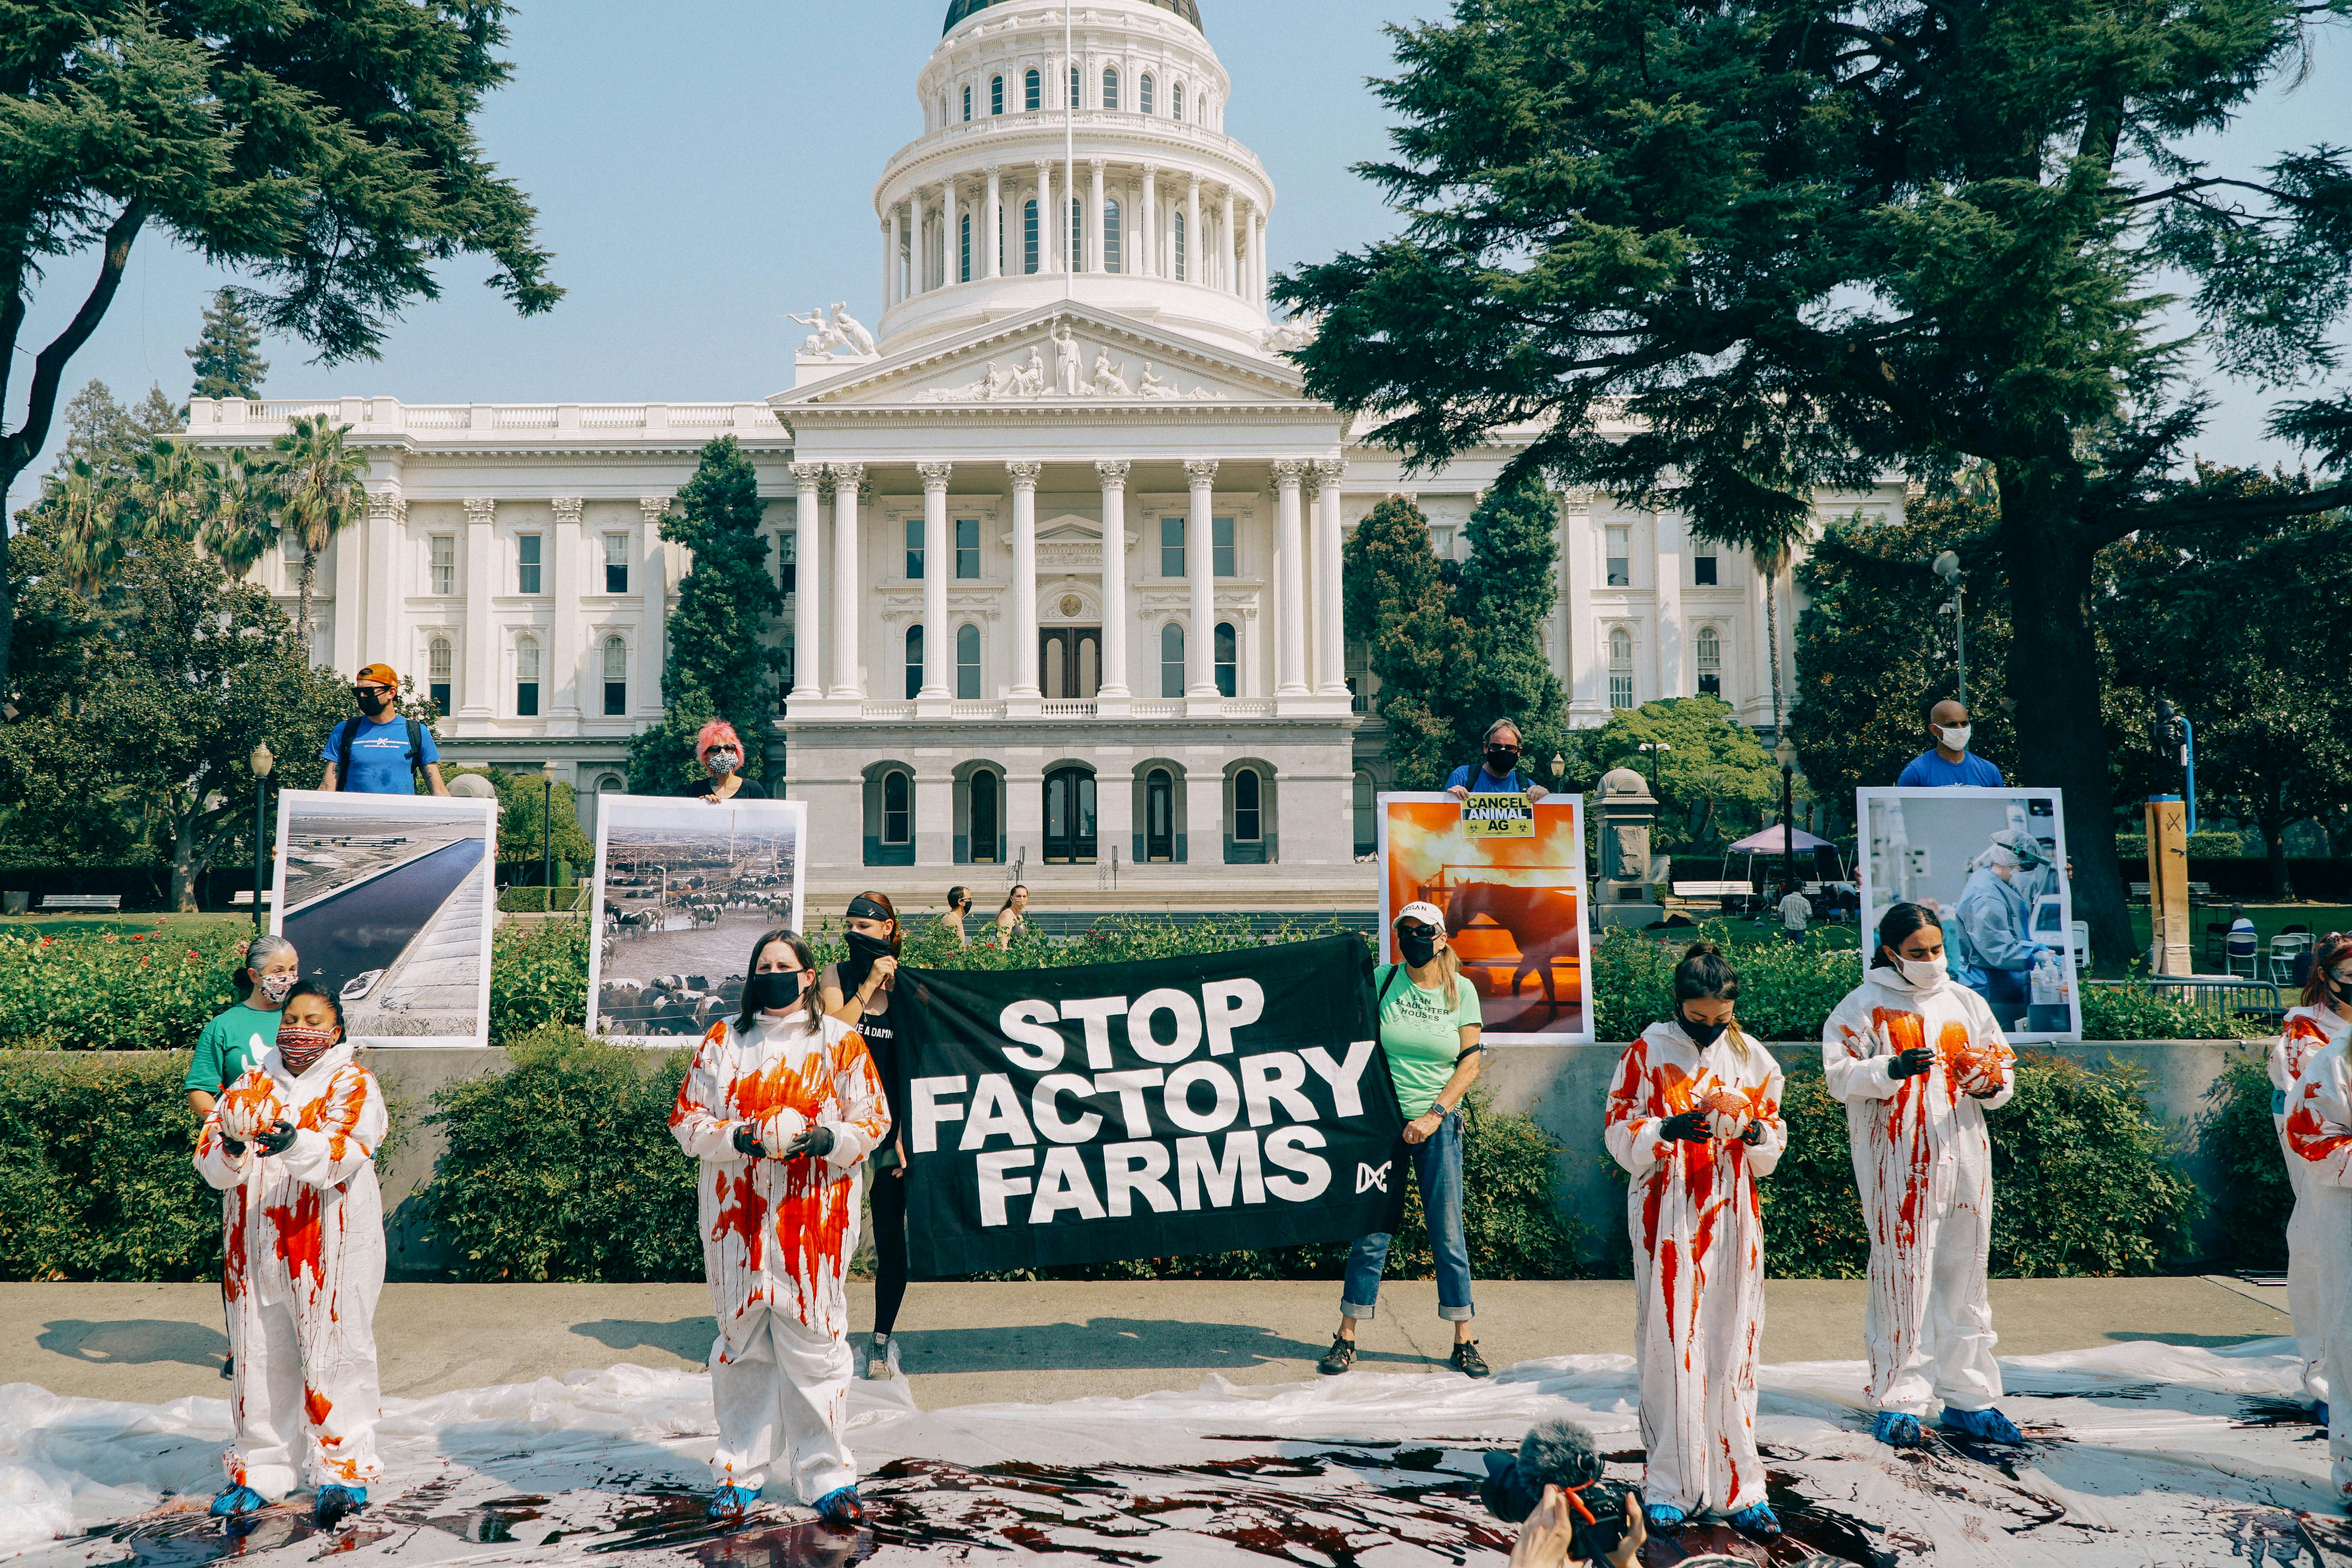 Animal Rights activists from Direct Action Everywhere protest in Sacramento to stop factory farms the negative effects on the climate crisis, is the contribution to pandemics, like covid-19 and animal cruelty.